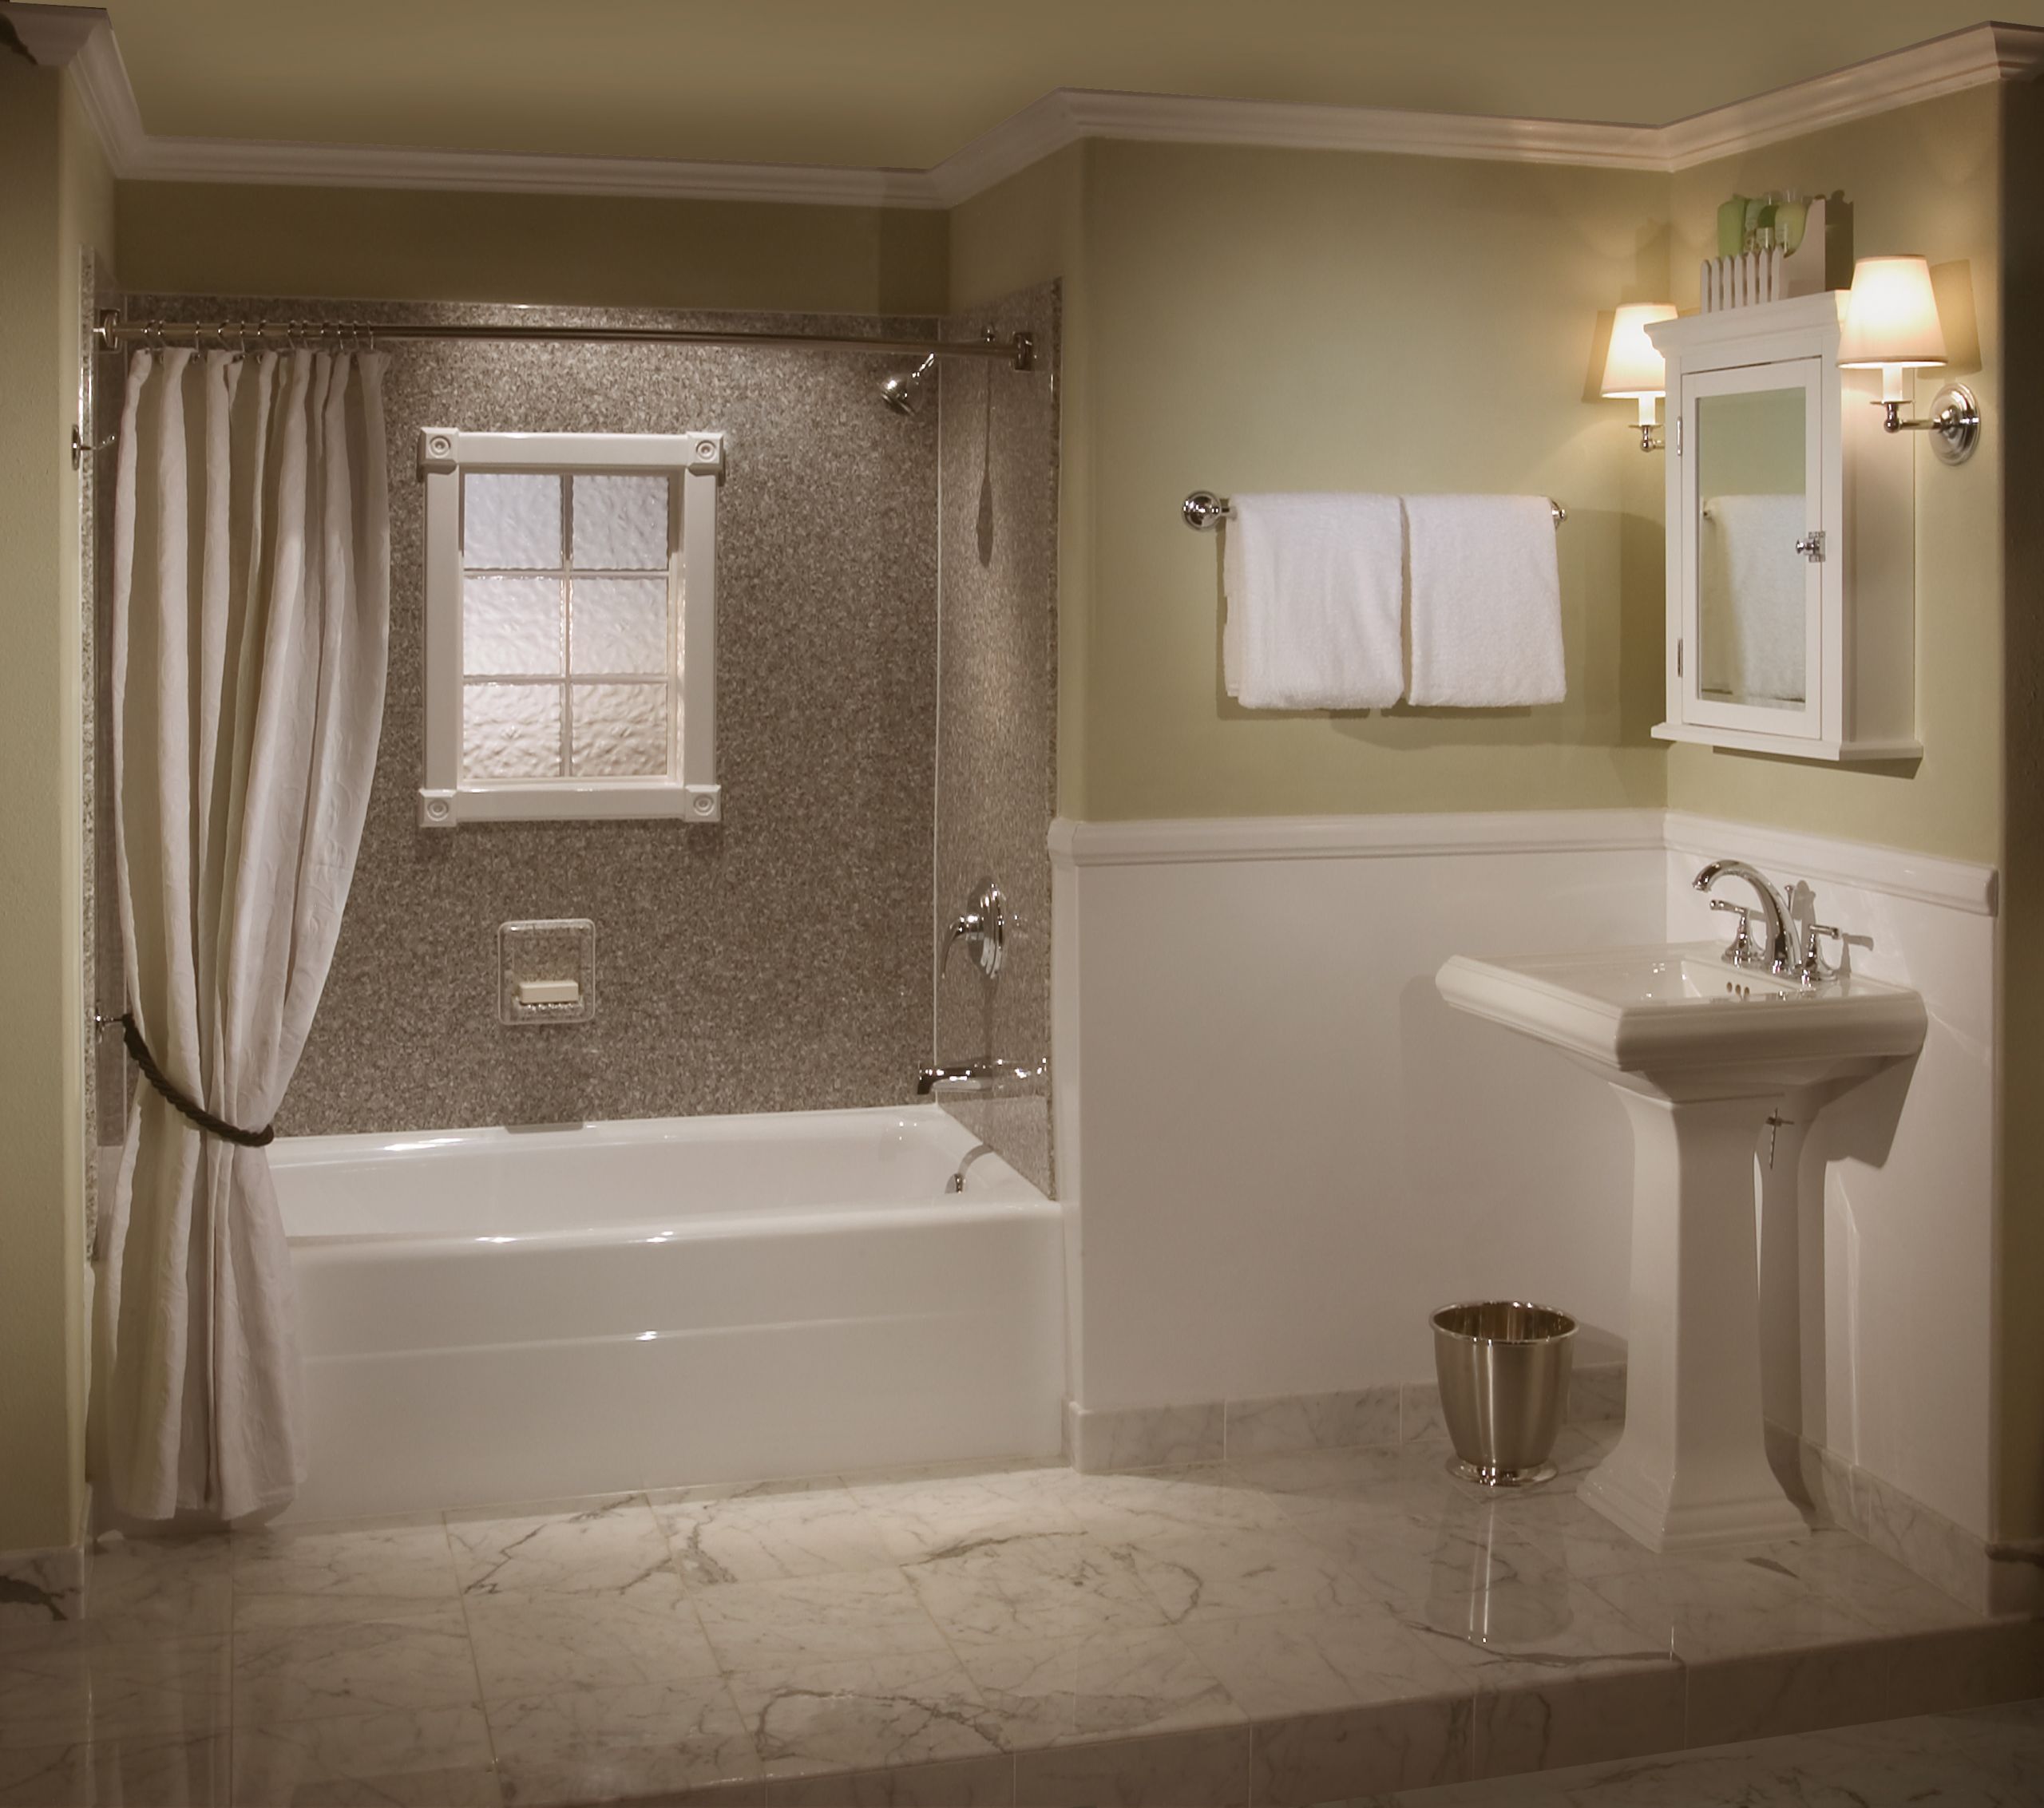 Remodeling Small Bathrooms
 Draft Your Bath Remodel Cost Estimation – HomesFeed